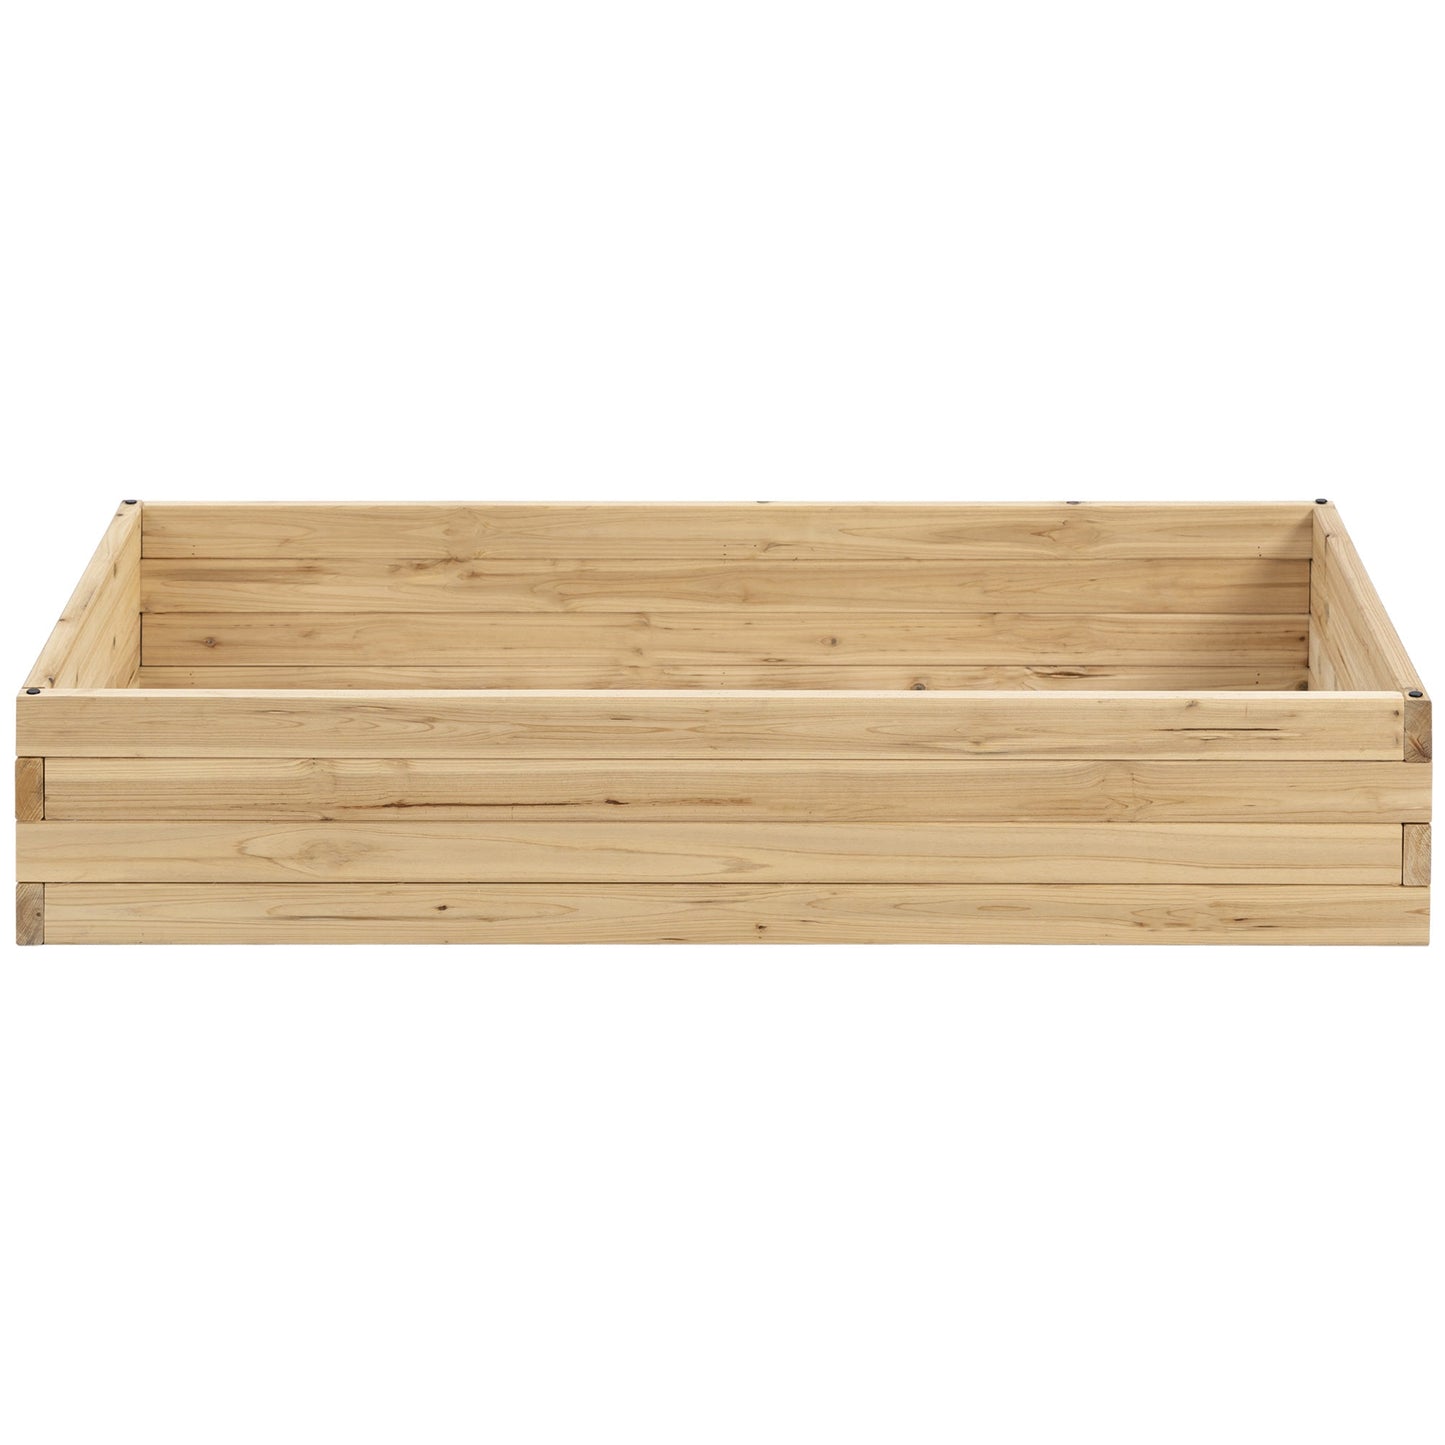 47" x 24" x 9" Raised Garden Bed, Outdoor Wooden Planter Box for Growing Vegetables, Flowers, Fruits, Herbs, and Succulents, Easy Assembly at Gallery Canada